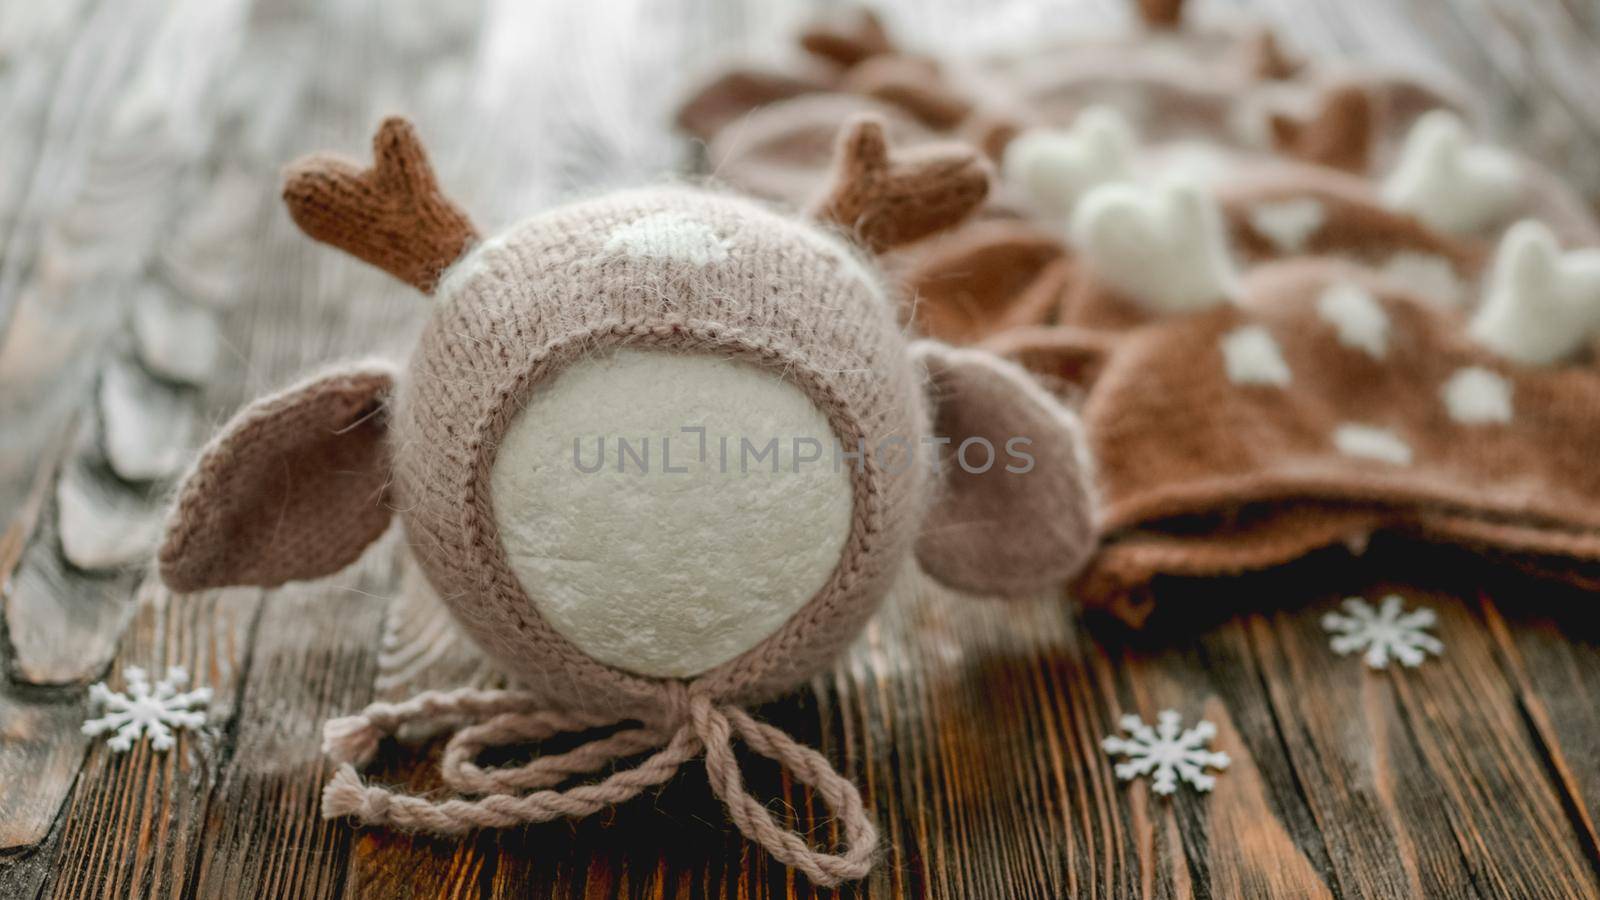 Knitted newborn hats for infant Christmas studio photoshoot on wooden background closeup. Cute baby clothes design